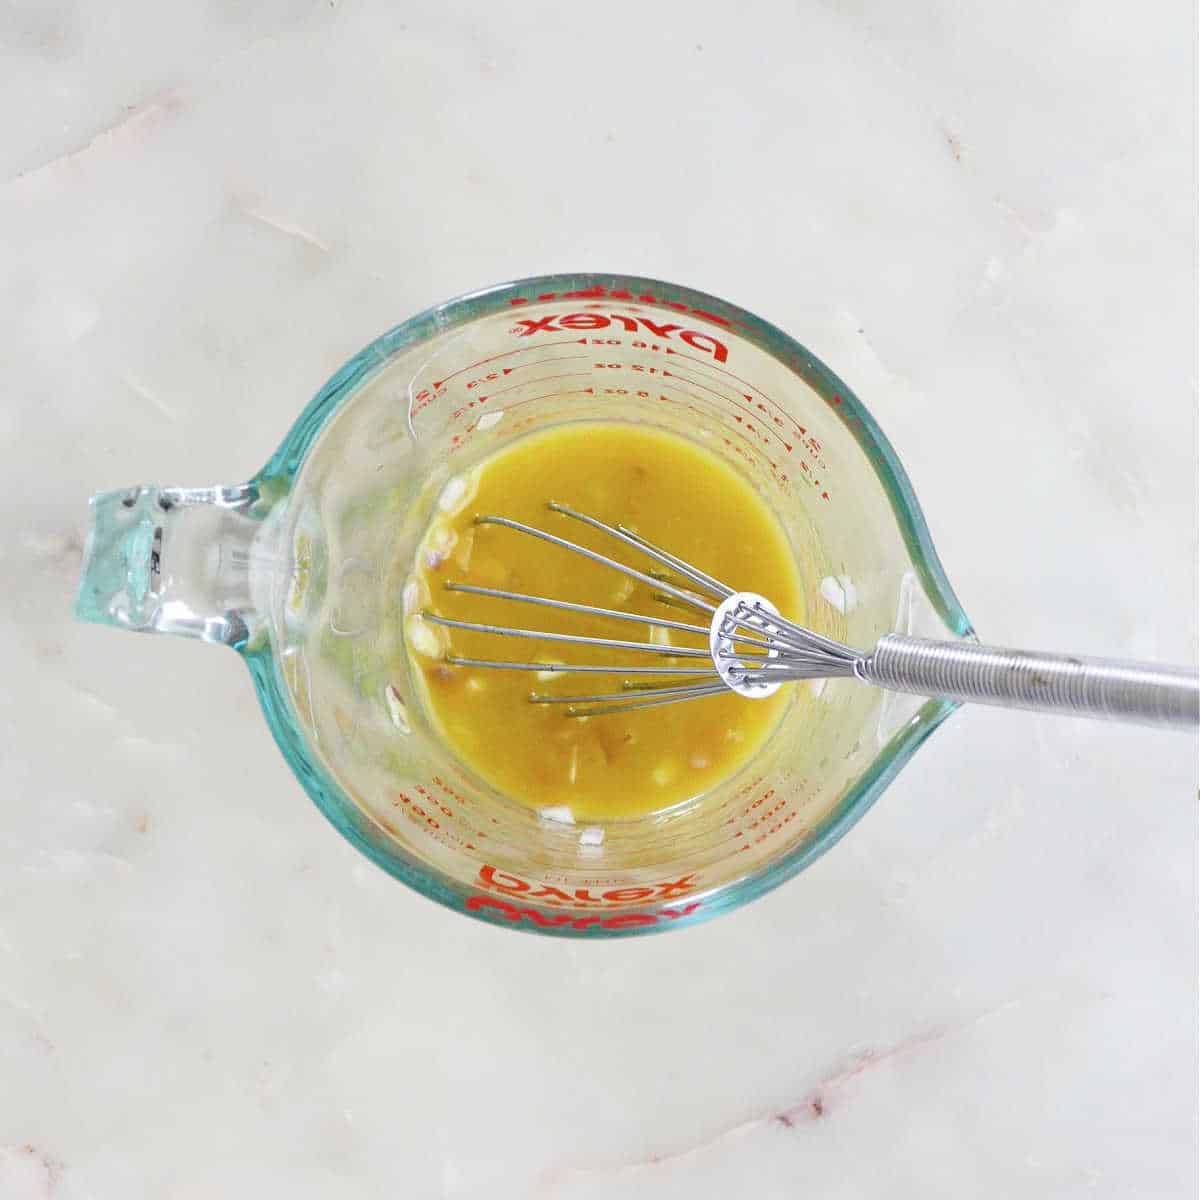 lemon dressing for salmon quinoa salad whisked together in a measuring cup on a counter